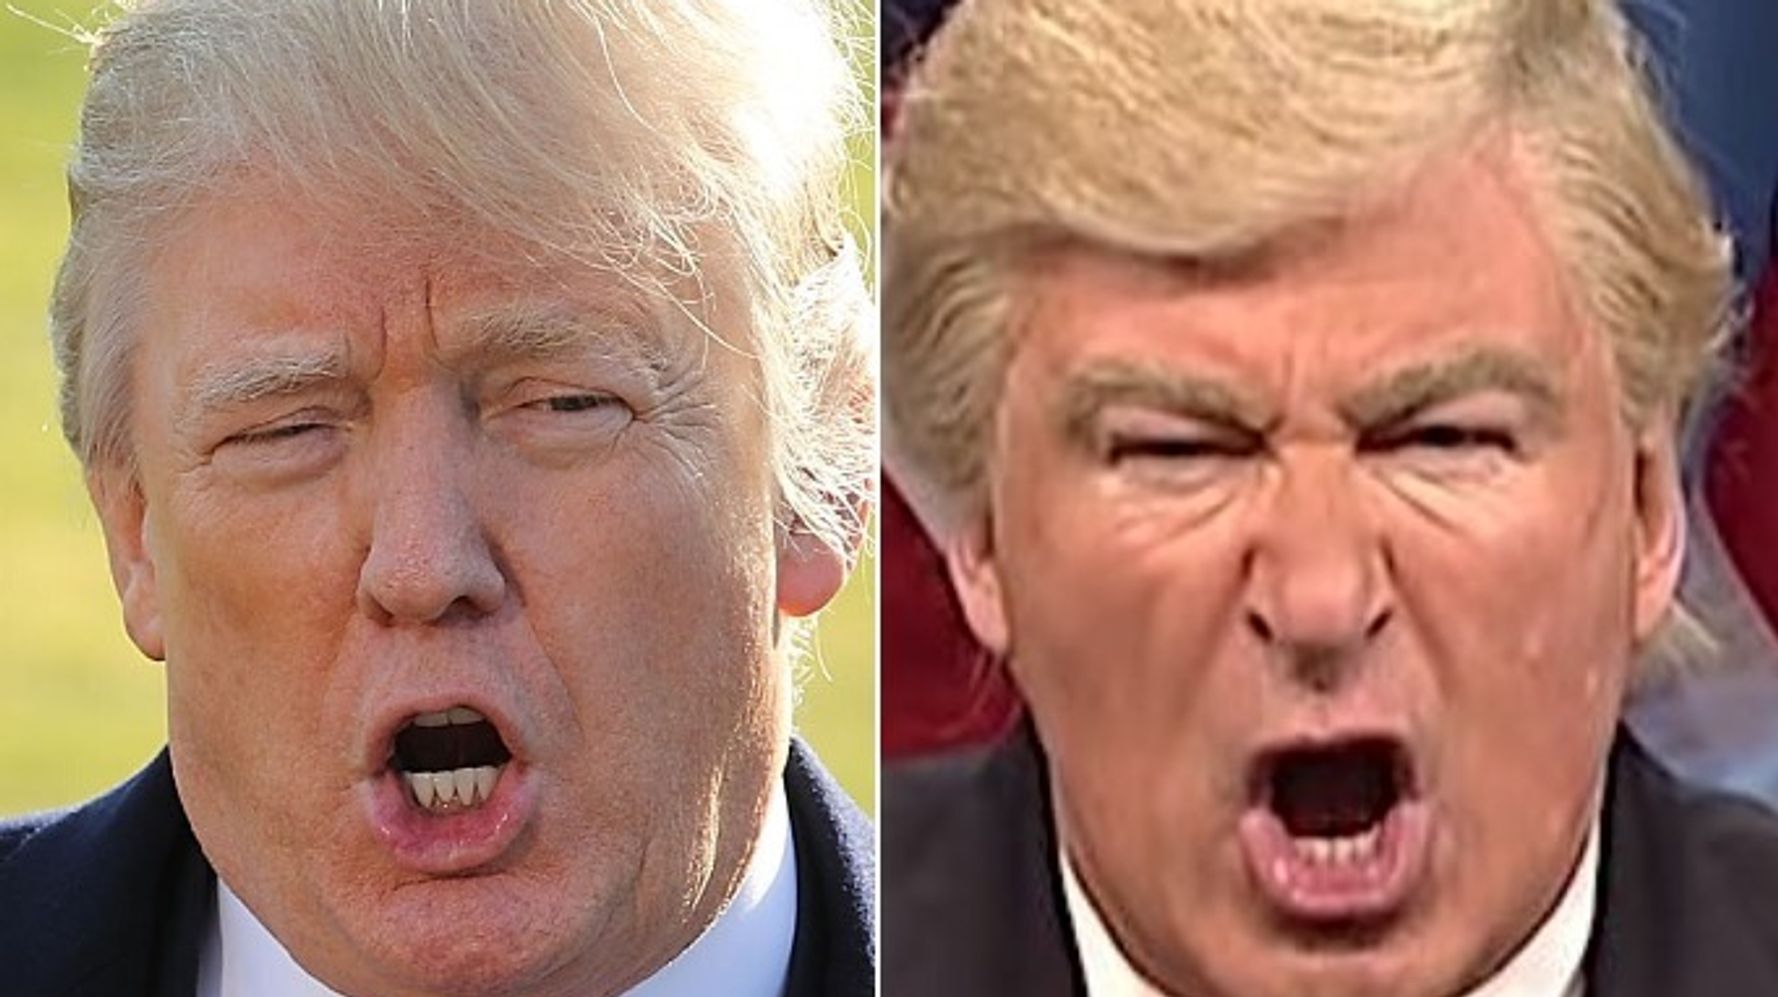 Trump Rages Against 'Saturday Night Live' In Unhinged Conspiracy Rant